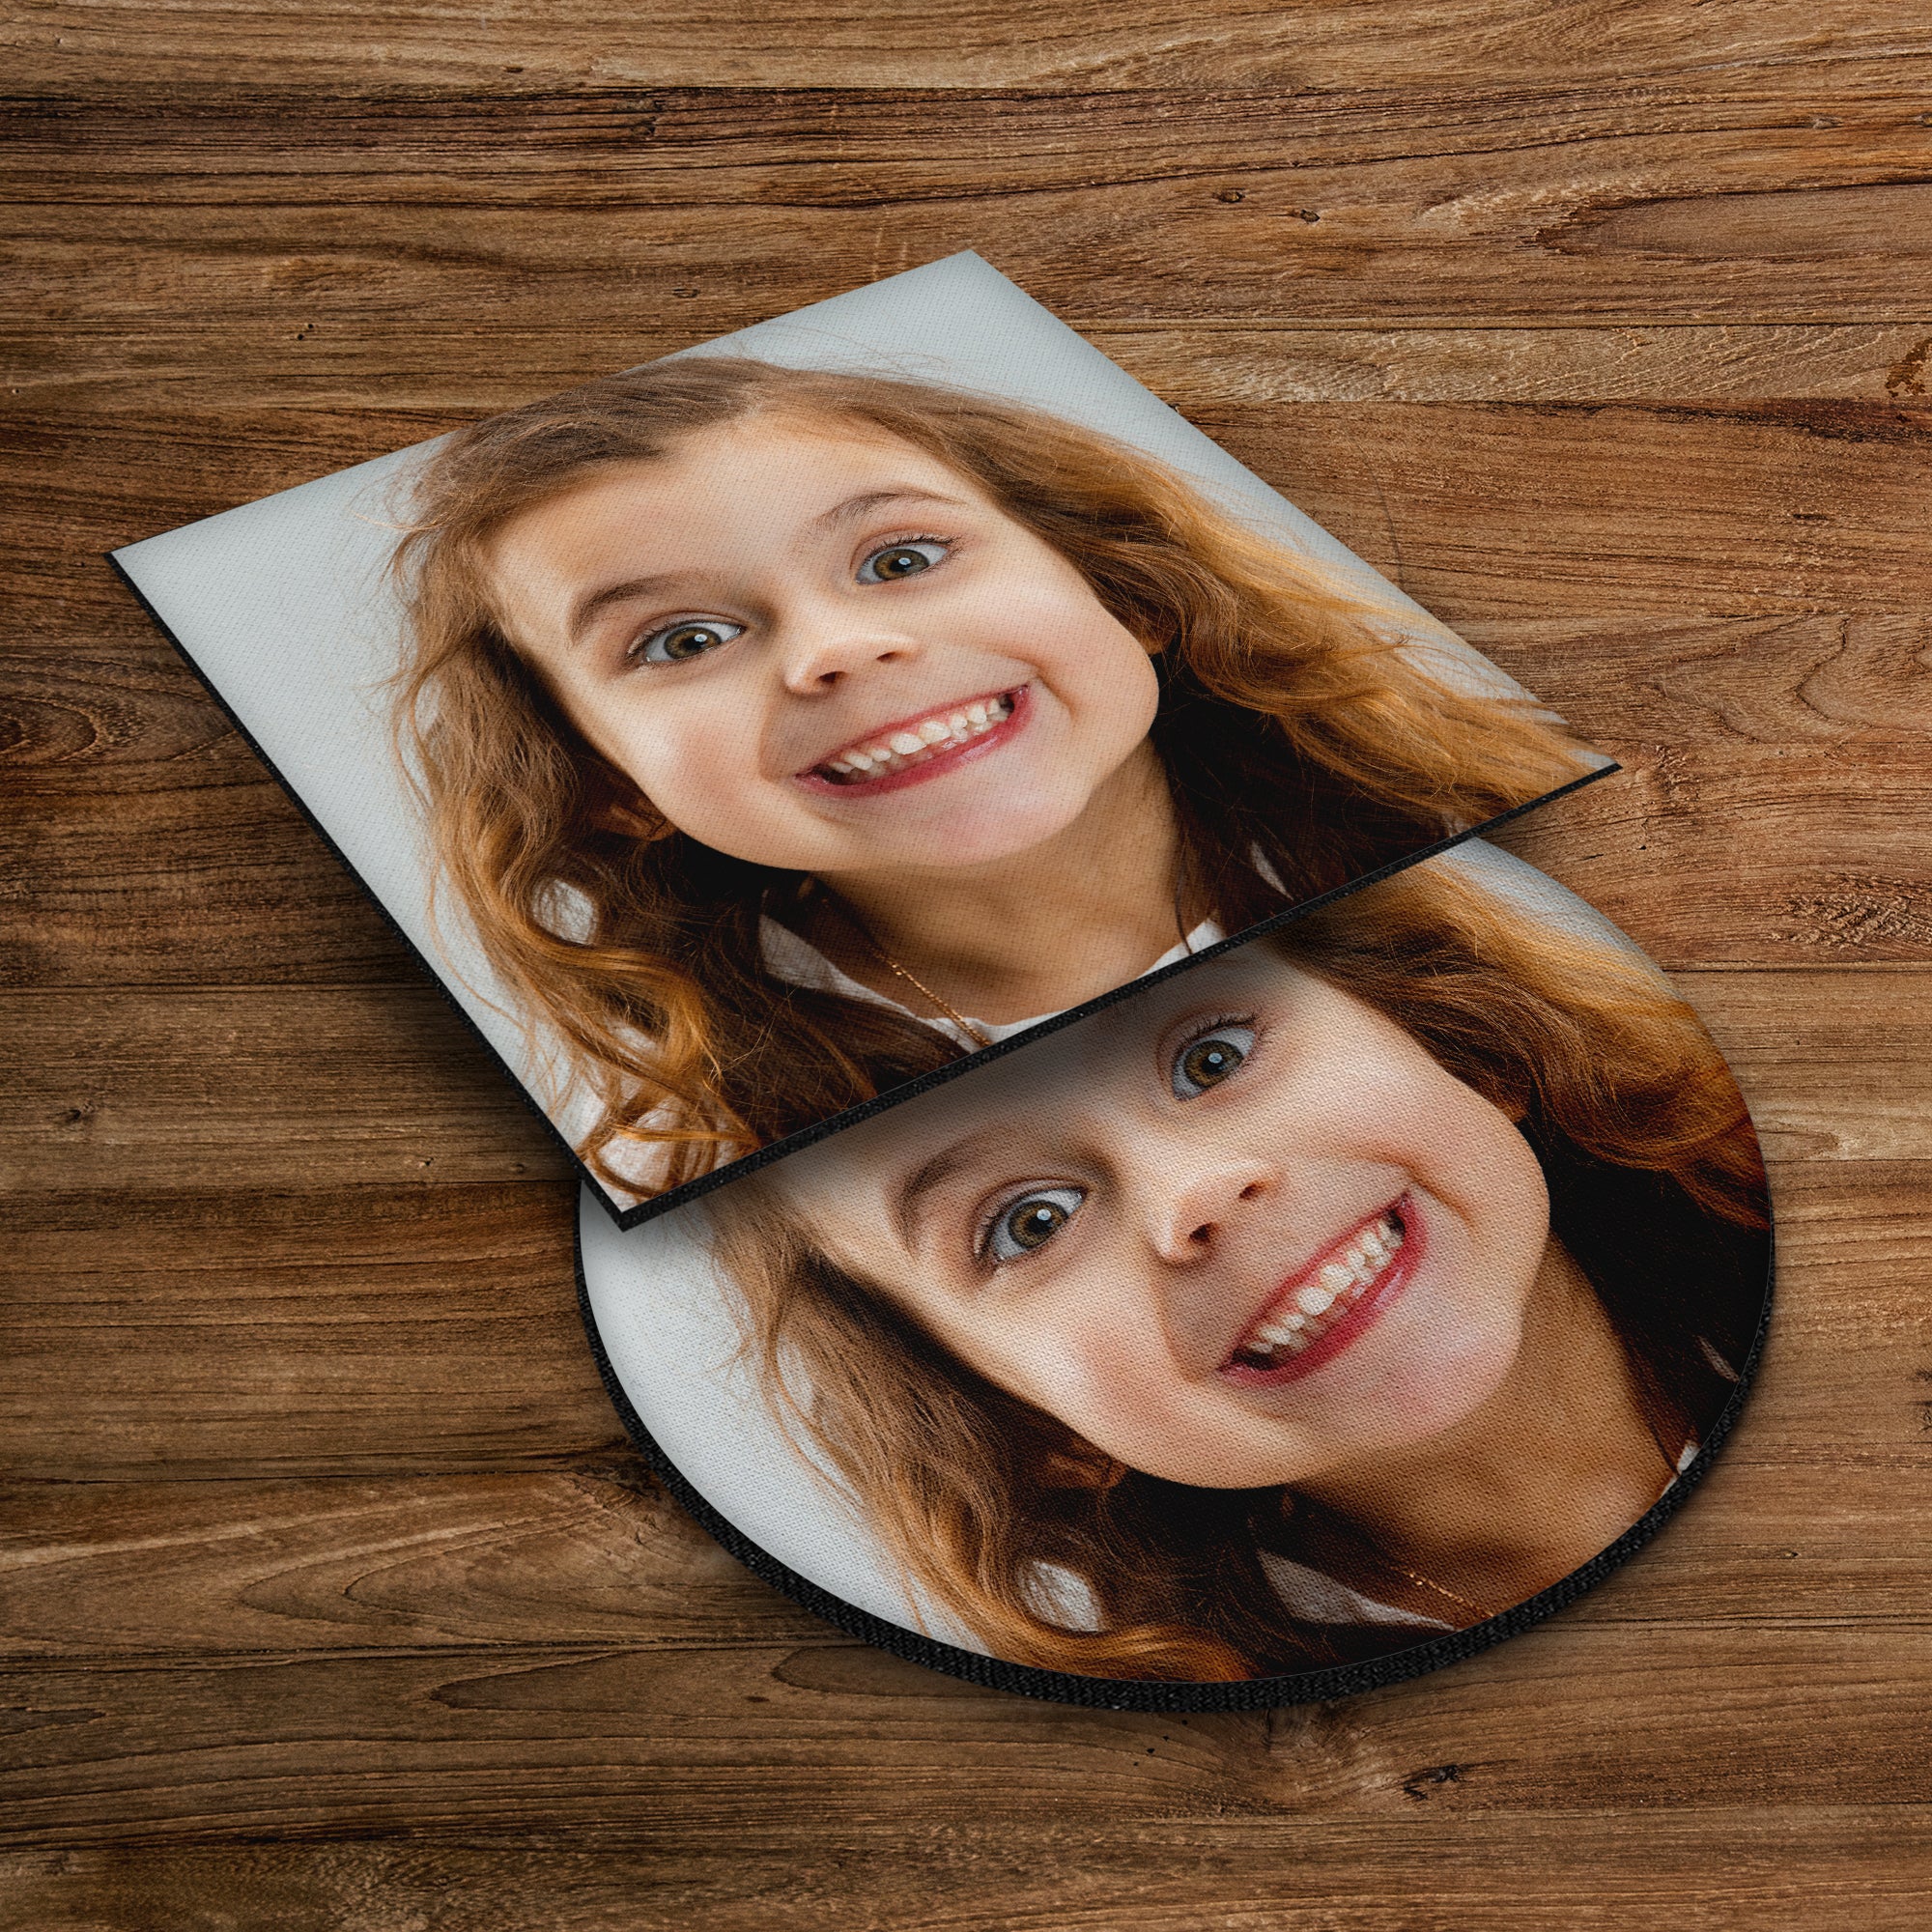 Your Face - Personalised Drinks Coaster - Round or Square